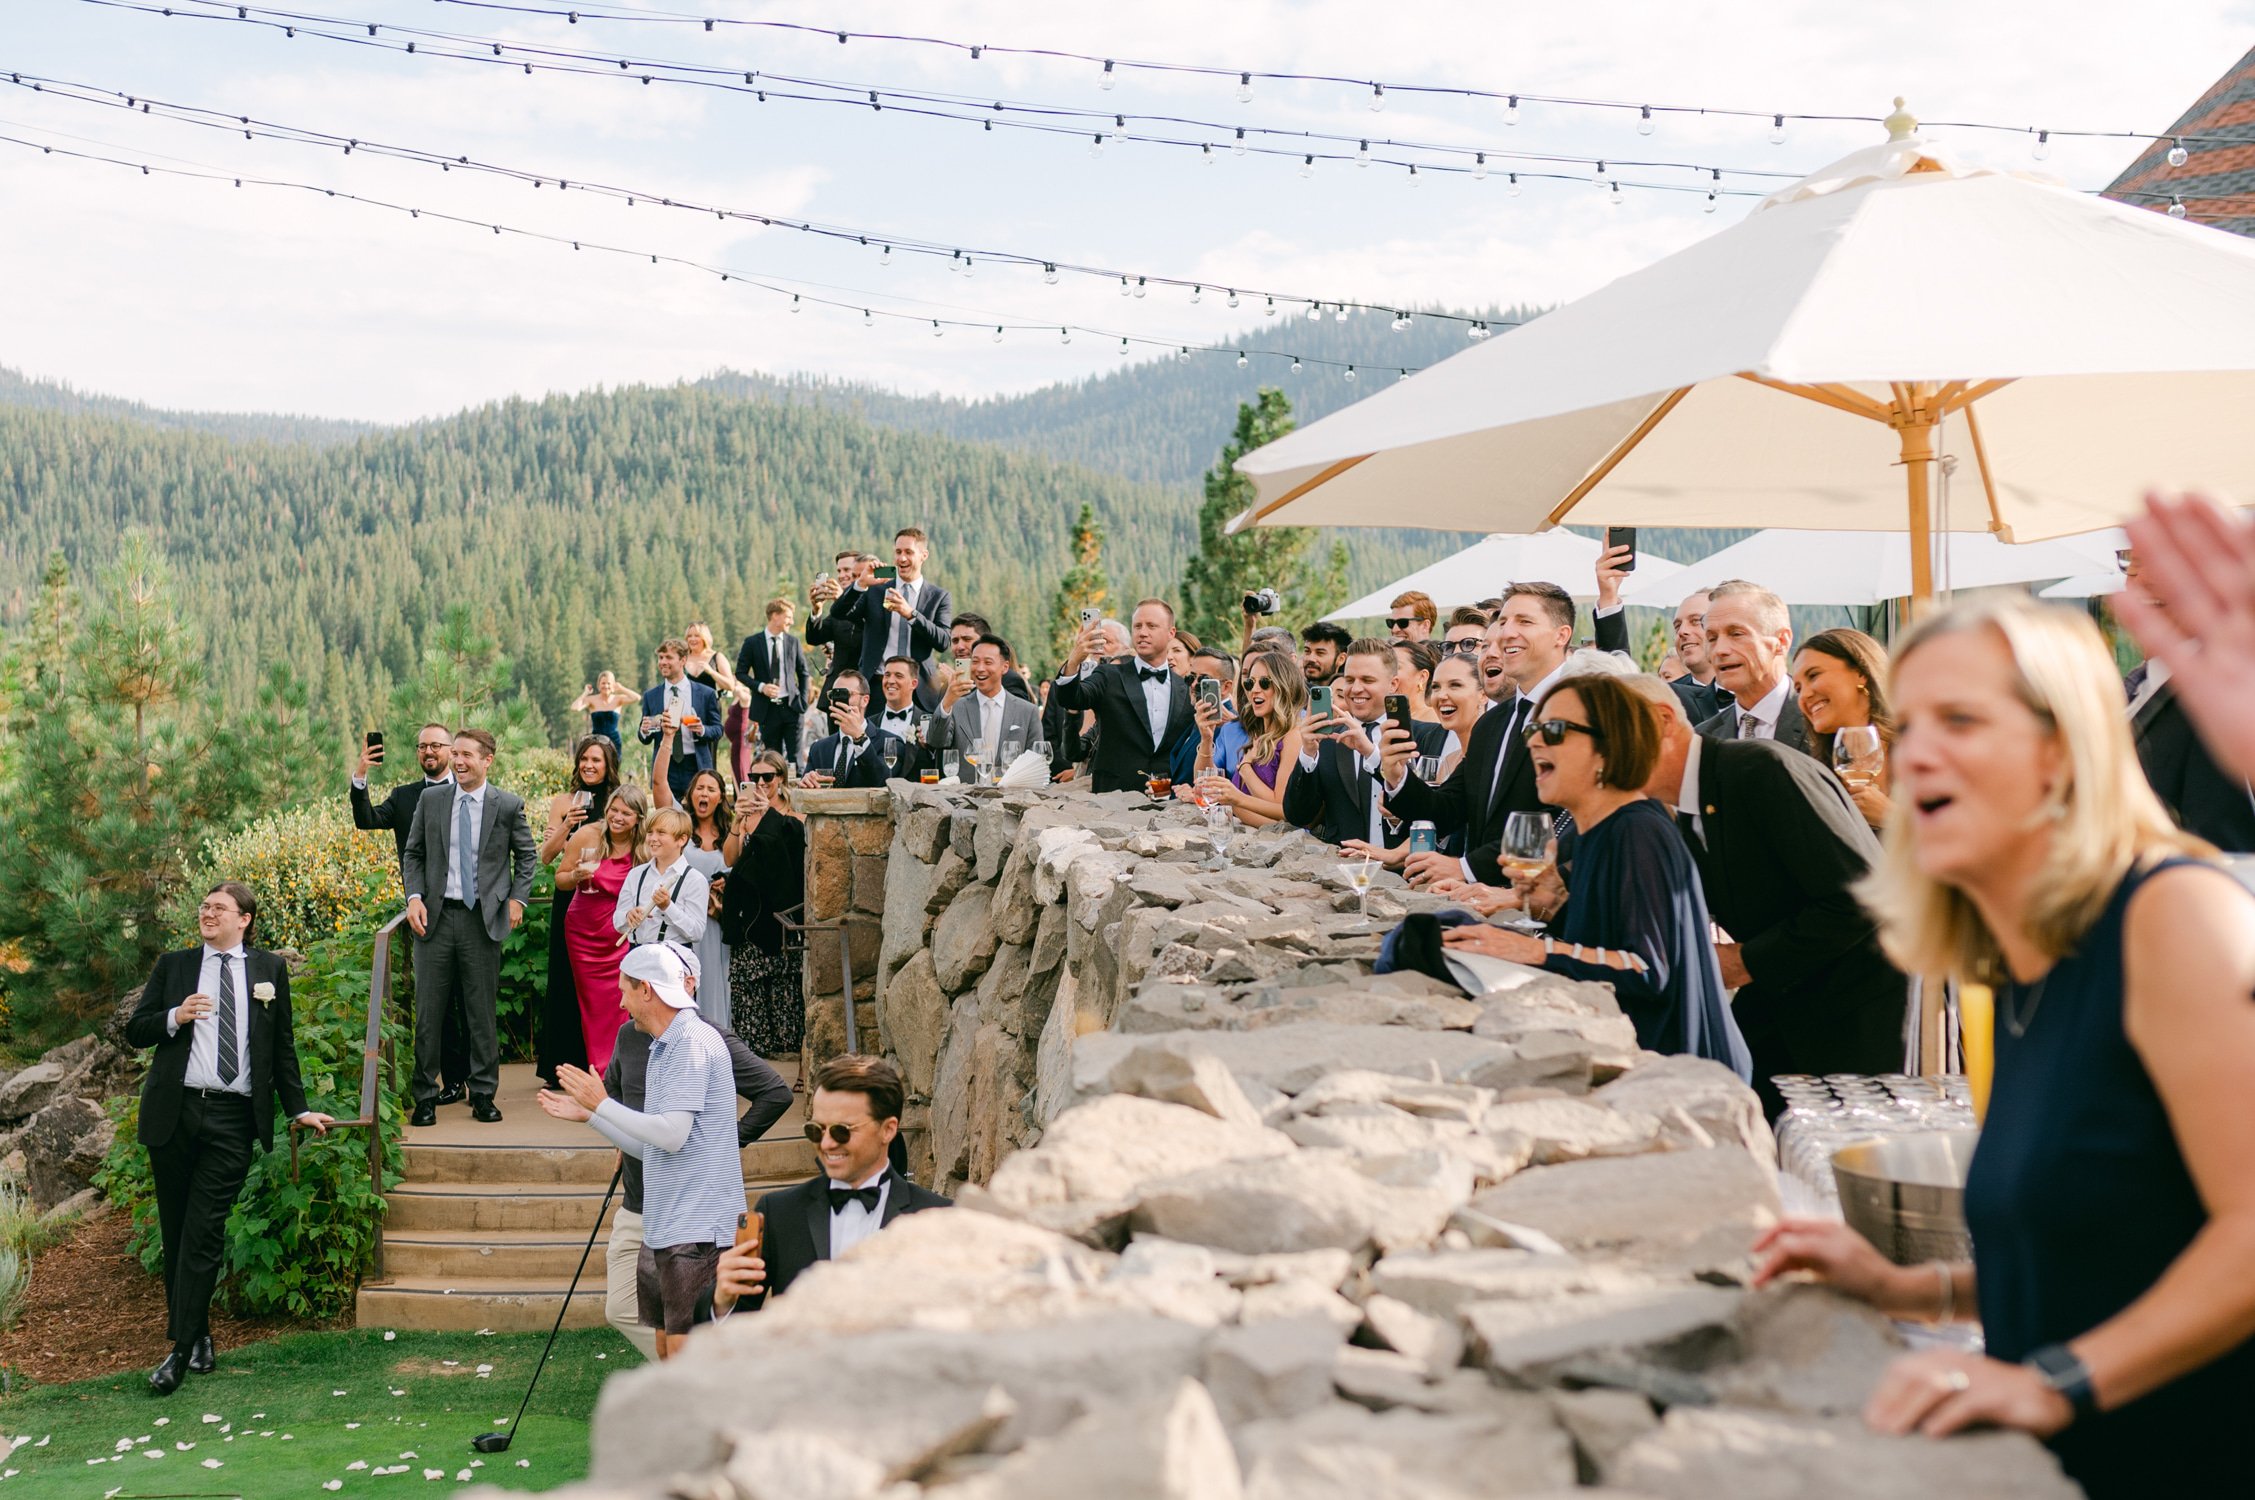 Martis Camp Wedding, photo of the wedding guests cheering the newlywed couple during the afternoon reception